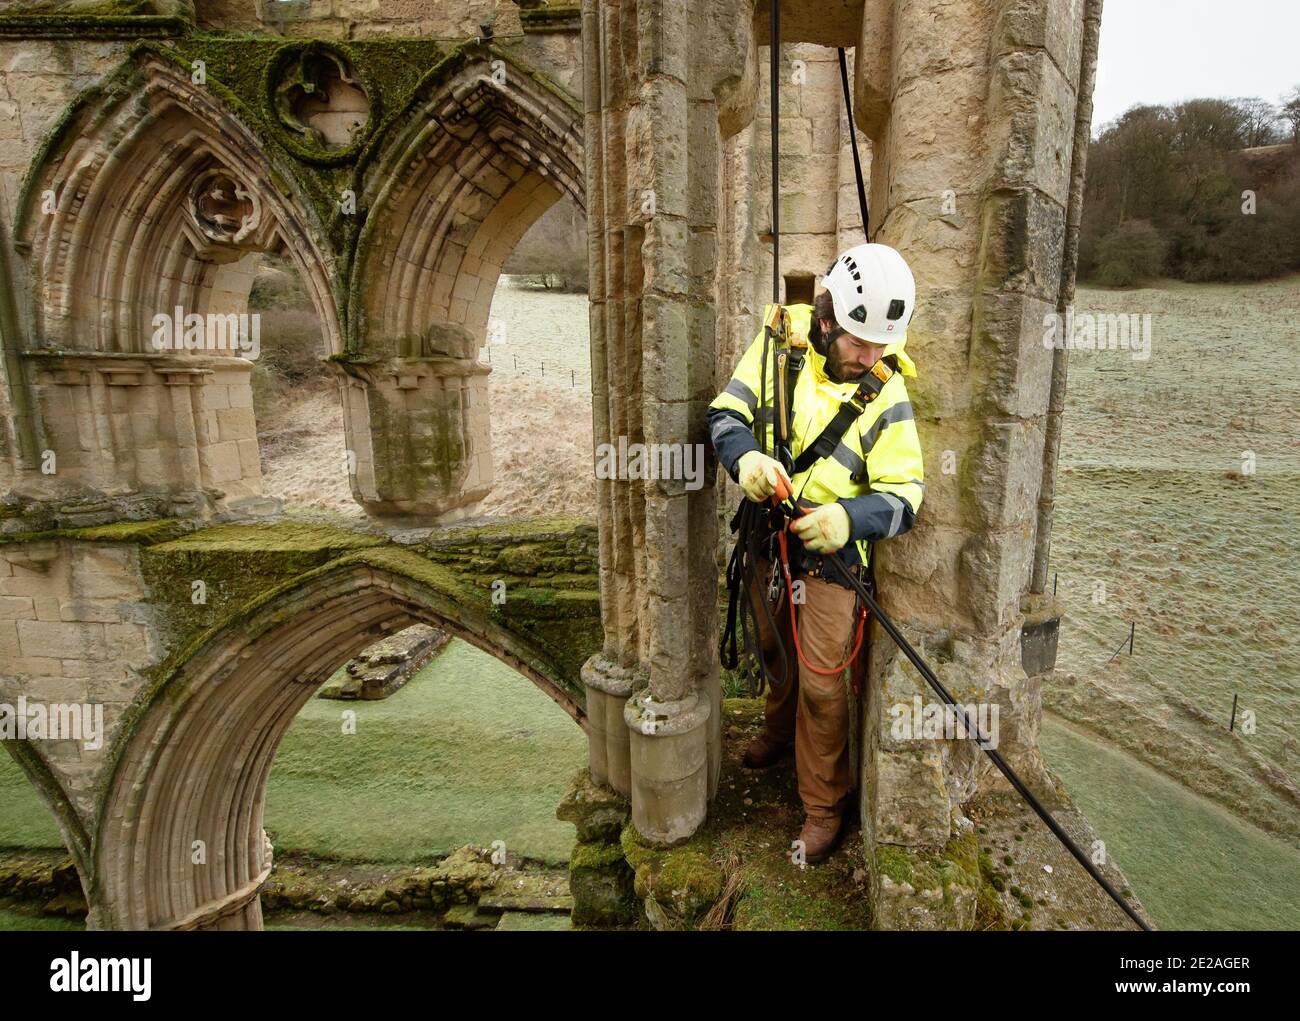 Stonemason James Preston from SSH Conservation, surveys Rievaulx Abbey in North Yorkshire as English Heritage prepares to carry out vital conservation work. English Heritage commissions a survey at Rievaulx Abbey on a five year cycle to assess the condition of the abbey from ground level right to the top of the structure. Stock Photo